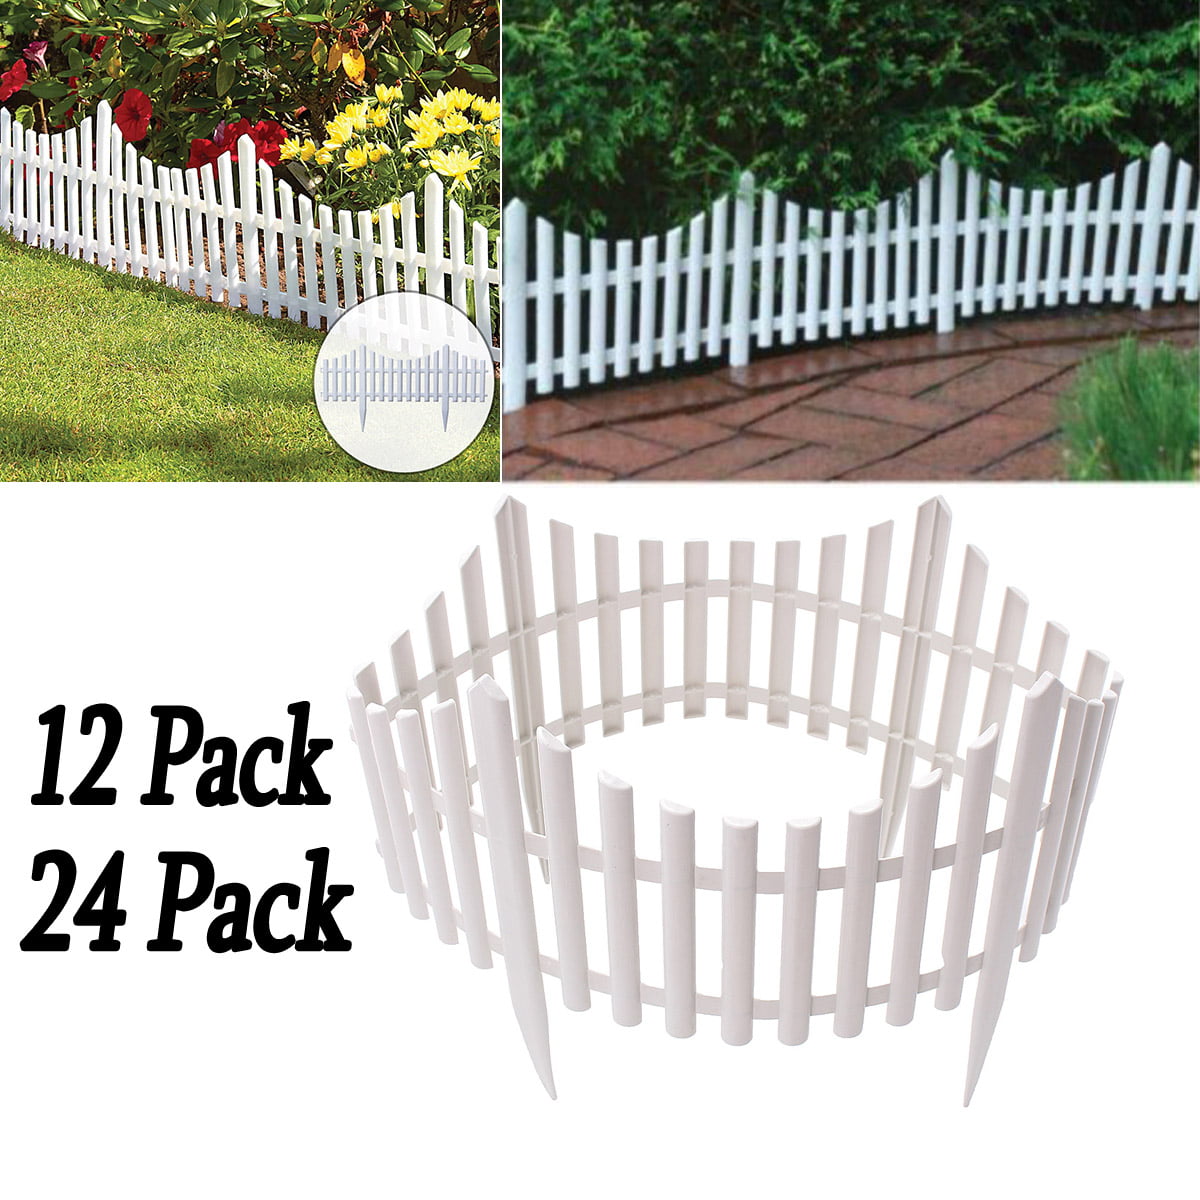 Details about   12 Piece 24ft Steel Fence Panel Privacy Screen Fencing Wall Border Garden Yard 